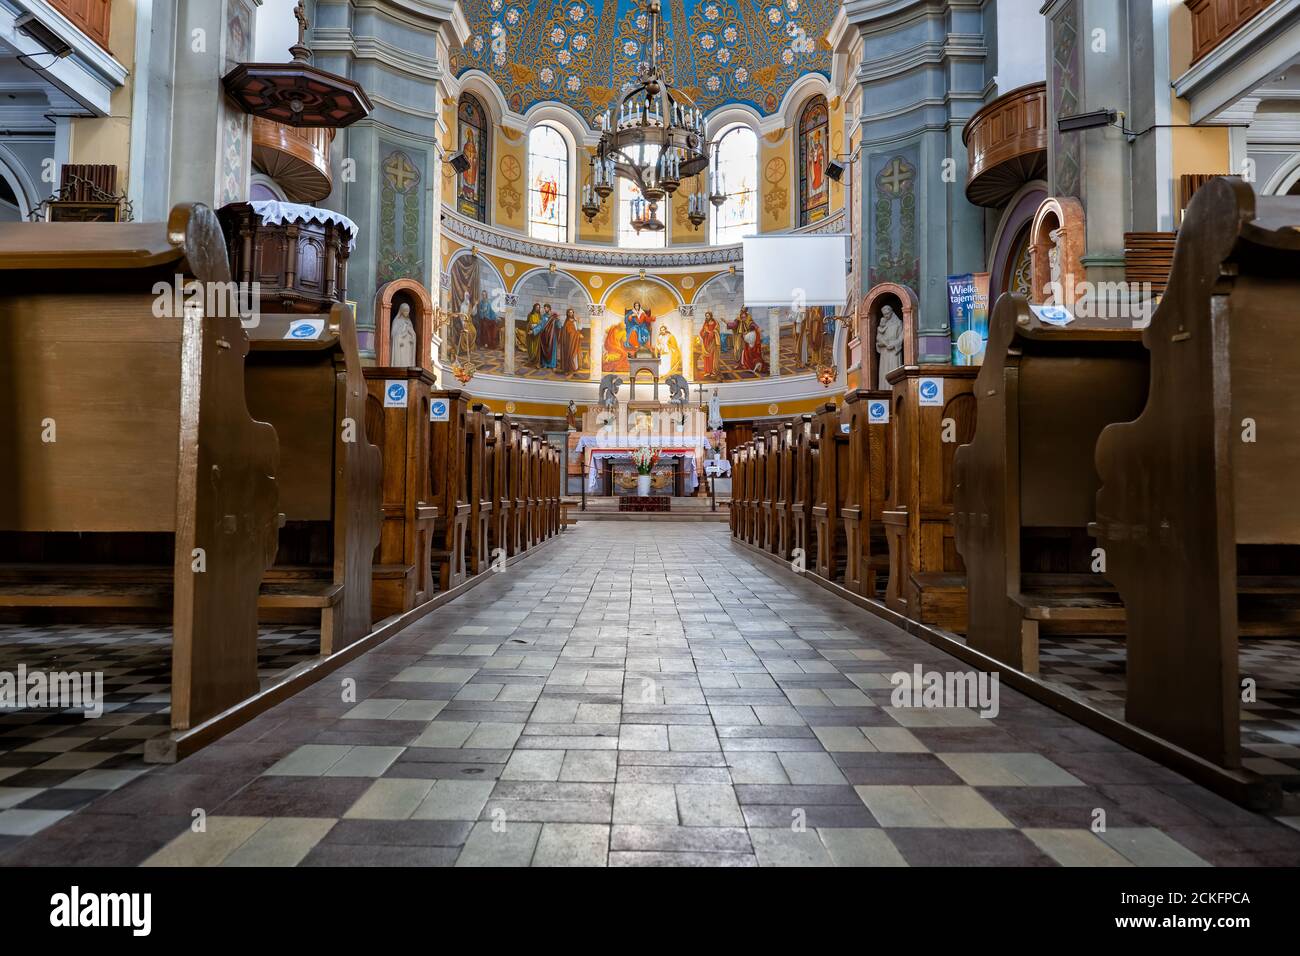 Lodz, Poland - August 7, 2020: Church of Pentecost of the Holy Spirit interior, 19th century Eclectic style city landmark Stock Photo